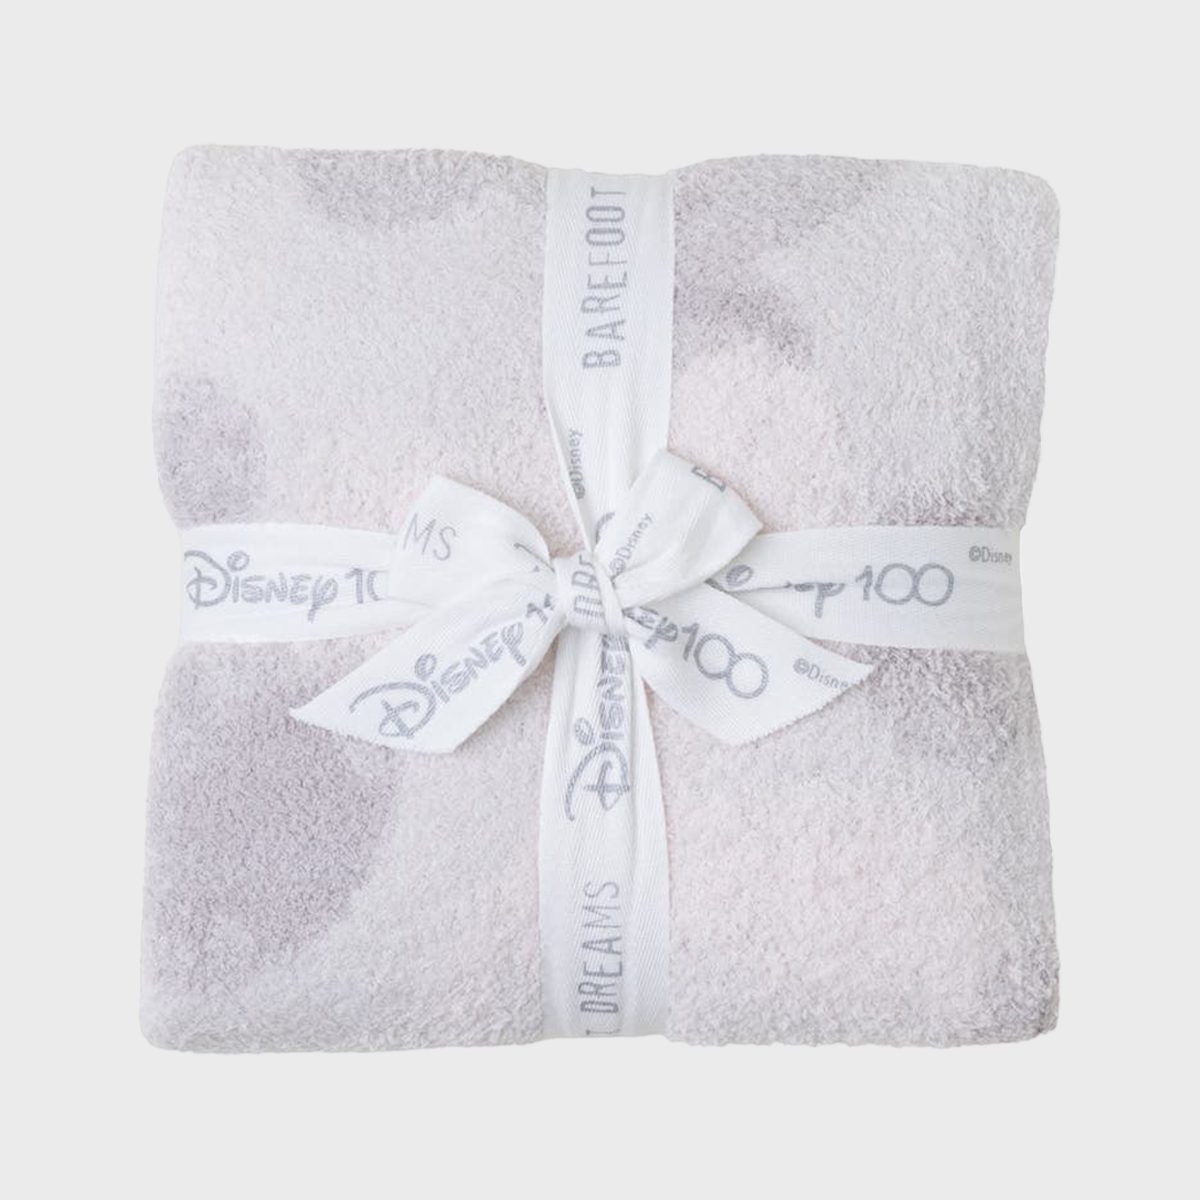 <p>Disney-loving parents will swoon over this ultra-soft <a href="https://www.nordstrom.com/s/x-disney-mickey-mouse-cozychic-stroller-blanket/7485446" rel="noopener noreferrer">stroller blanket</a> from Barefoot Dreams, the company known for their gloriously plush throw blankets, bath robes and sweaters. This <a href="https://www.rd.com/list/disney-gifts/" rel="noopener noreferrer">Disney gift</a> is made of plush microfiber and measures 30-inches by 40-inches. Parents will be extra appreciative of the fact that this blanket is machine washable and will hold up for years to come since it's bound to be the baby's favorite.</p> <p class="listicle-page__cta-button-shop"><a class="shop-btn" href="https://www.nordstrom.com/s/x-disney-mickey-mouse-cozychic-stroller-blanket/7485446">Shop Now</a></p>